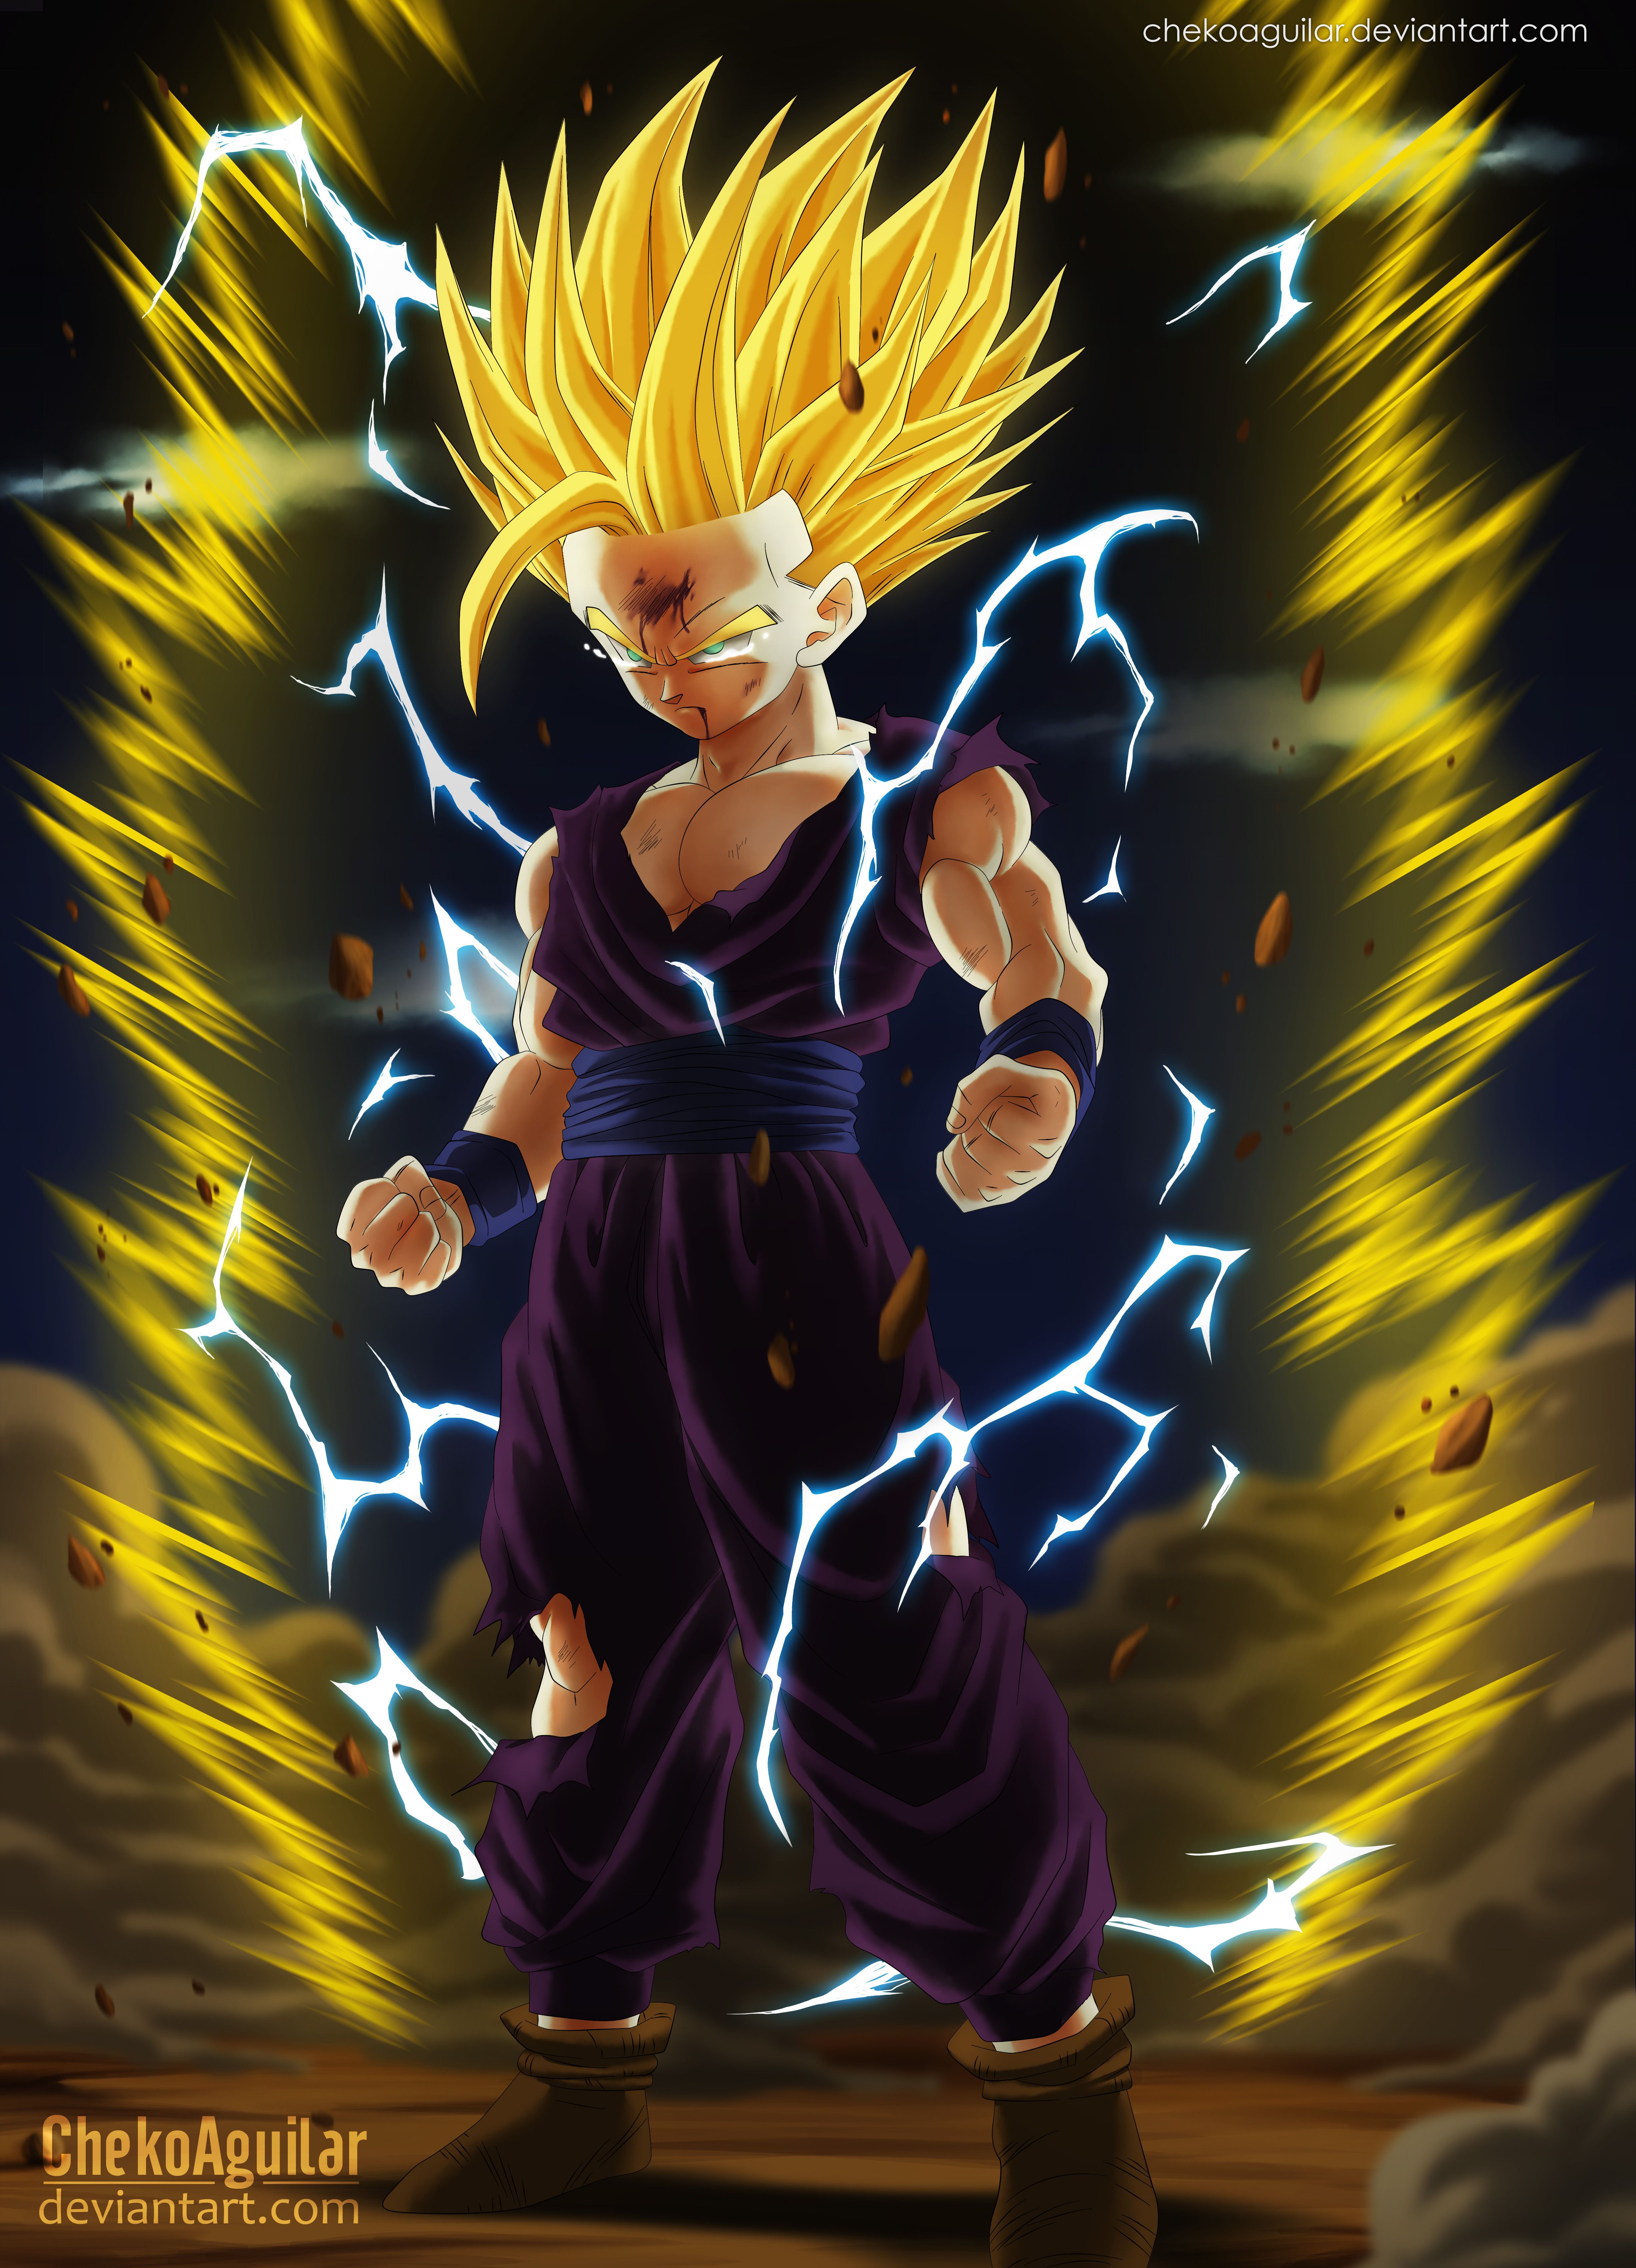 SUB Did an HD Remake of the PHY SS2 Goku card. which one should I